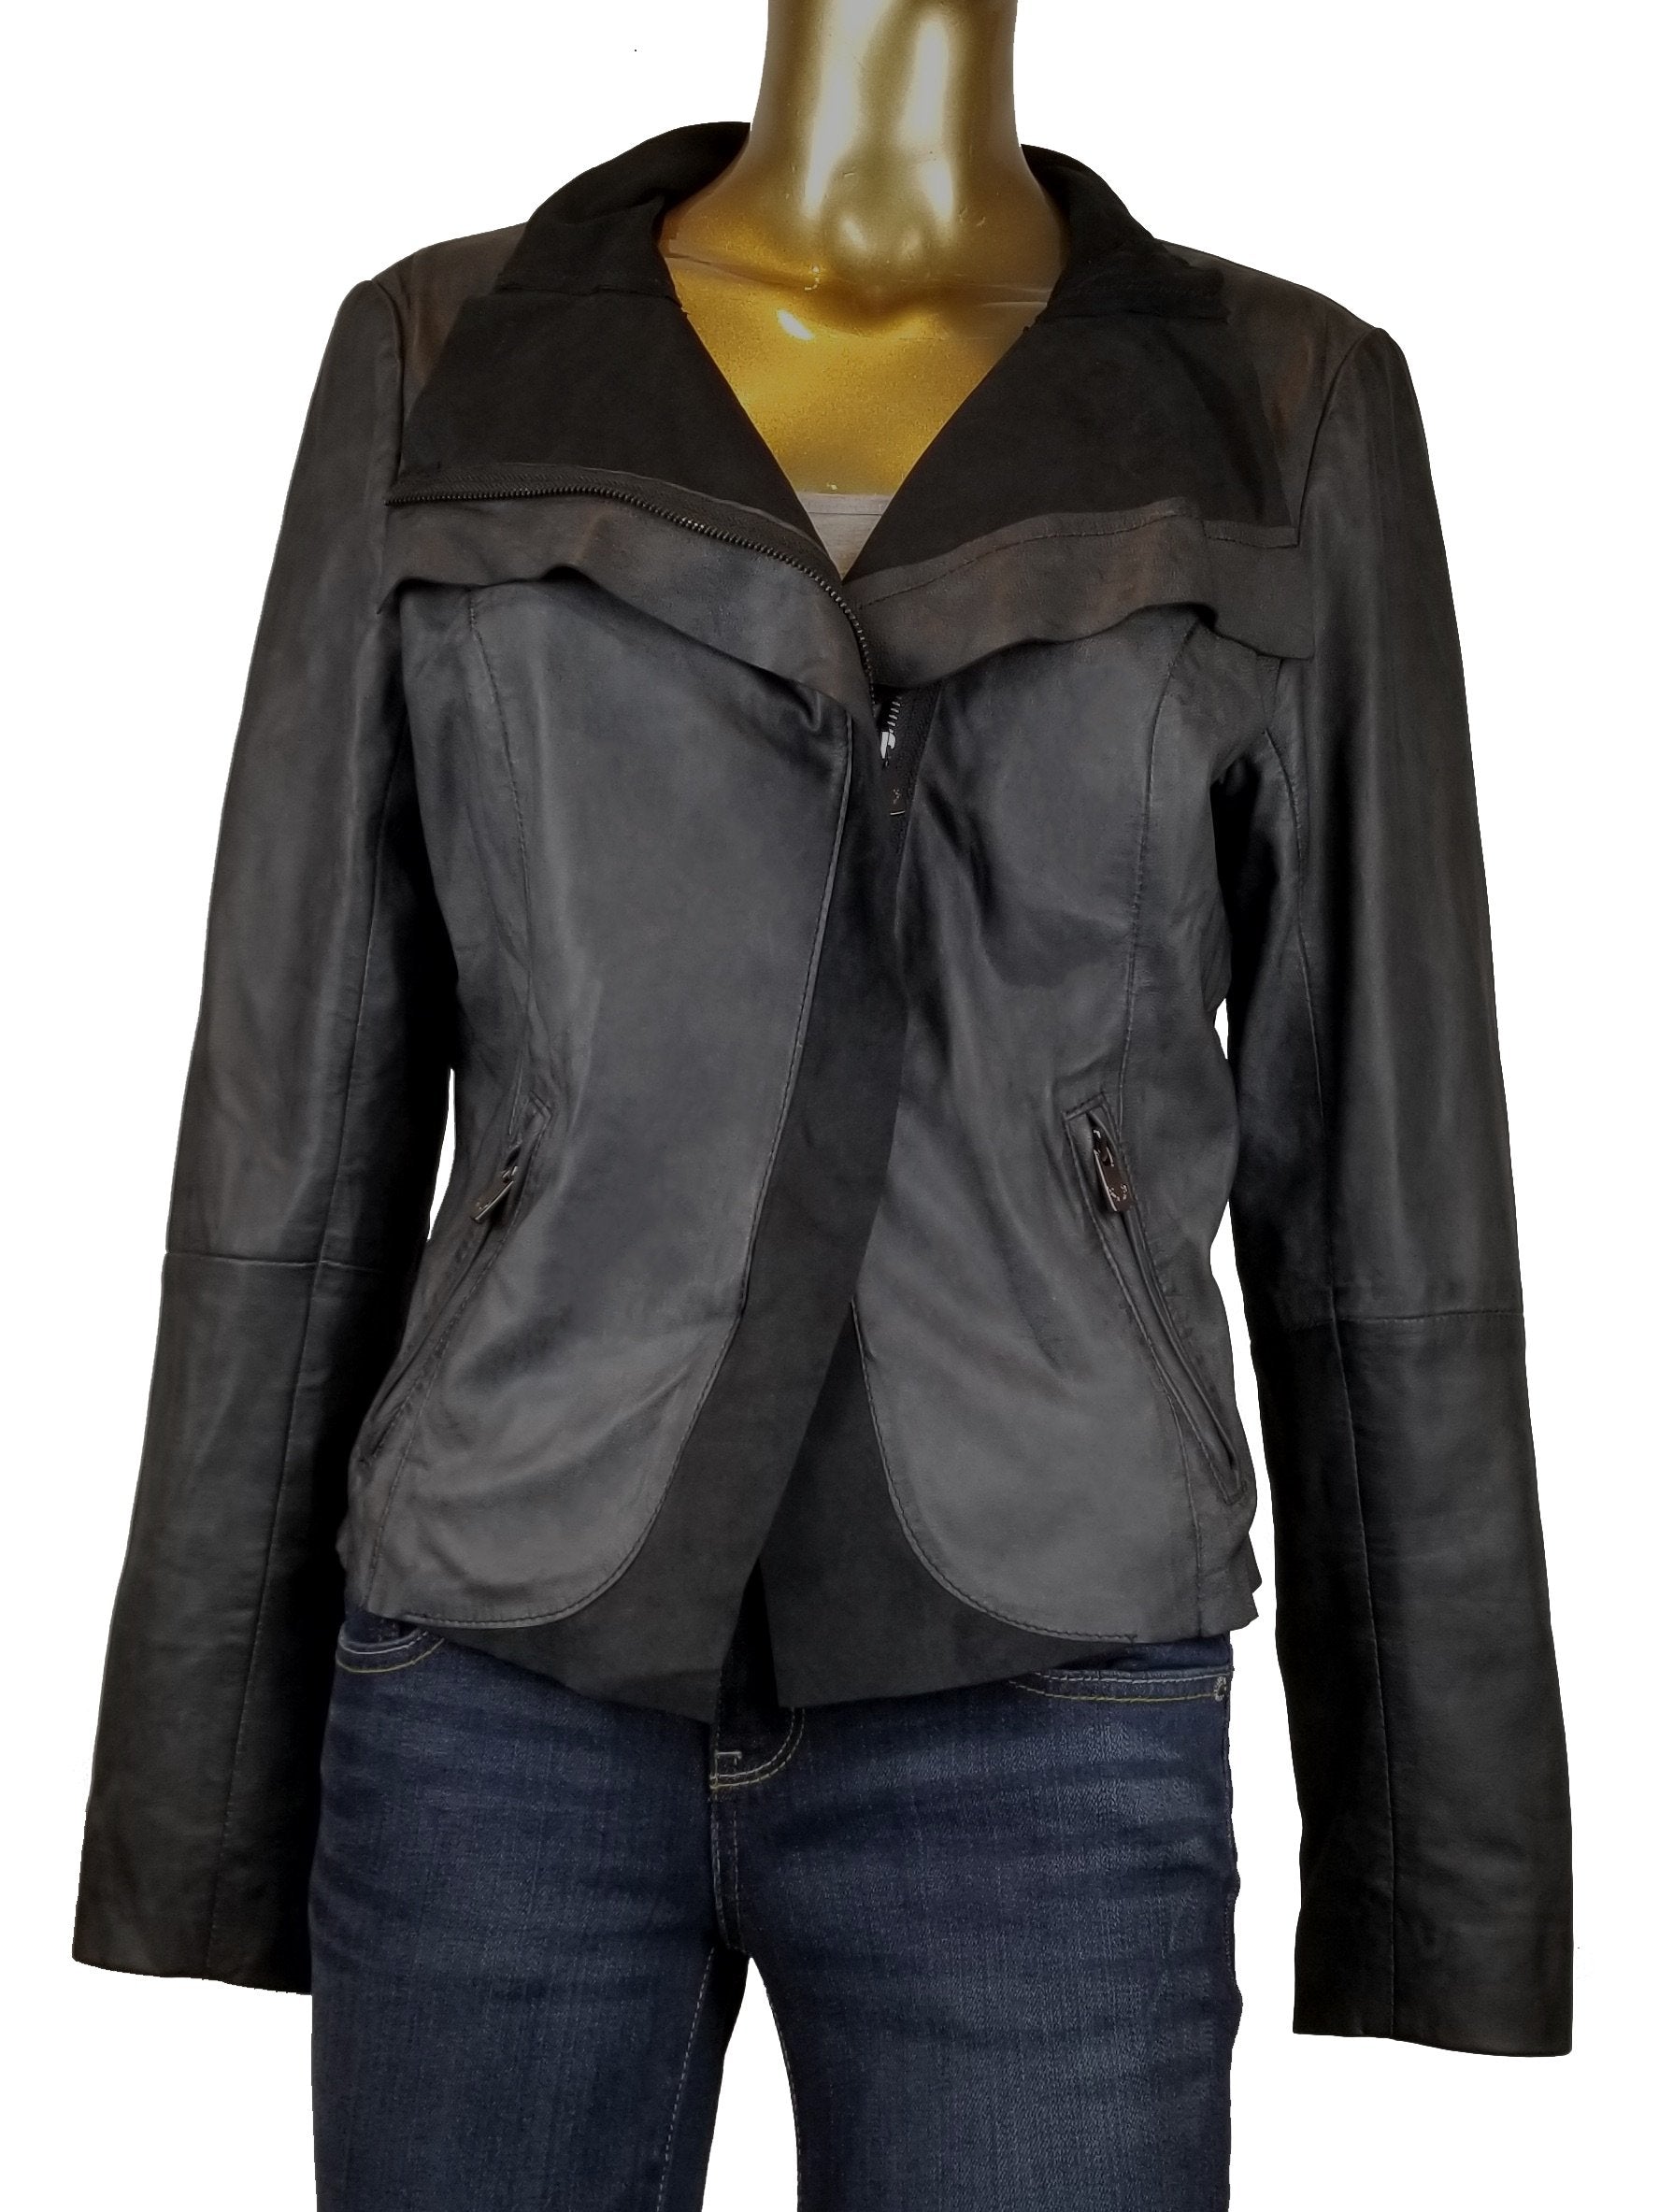 Bod & Christensen Women's Leather Moto Jacket, Soft leather that keeps you warm inside and shine outside , Black, 100% Leather shell, jacket, vintage women leather jacket, women black leather jacket